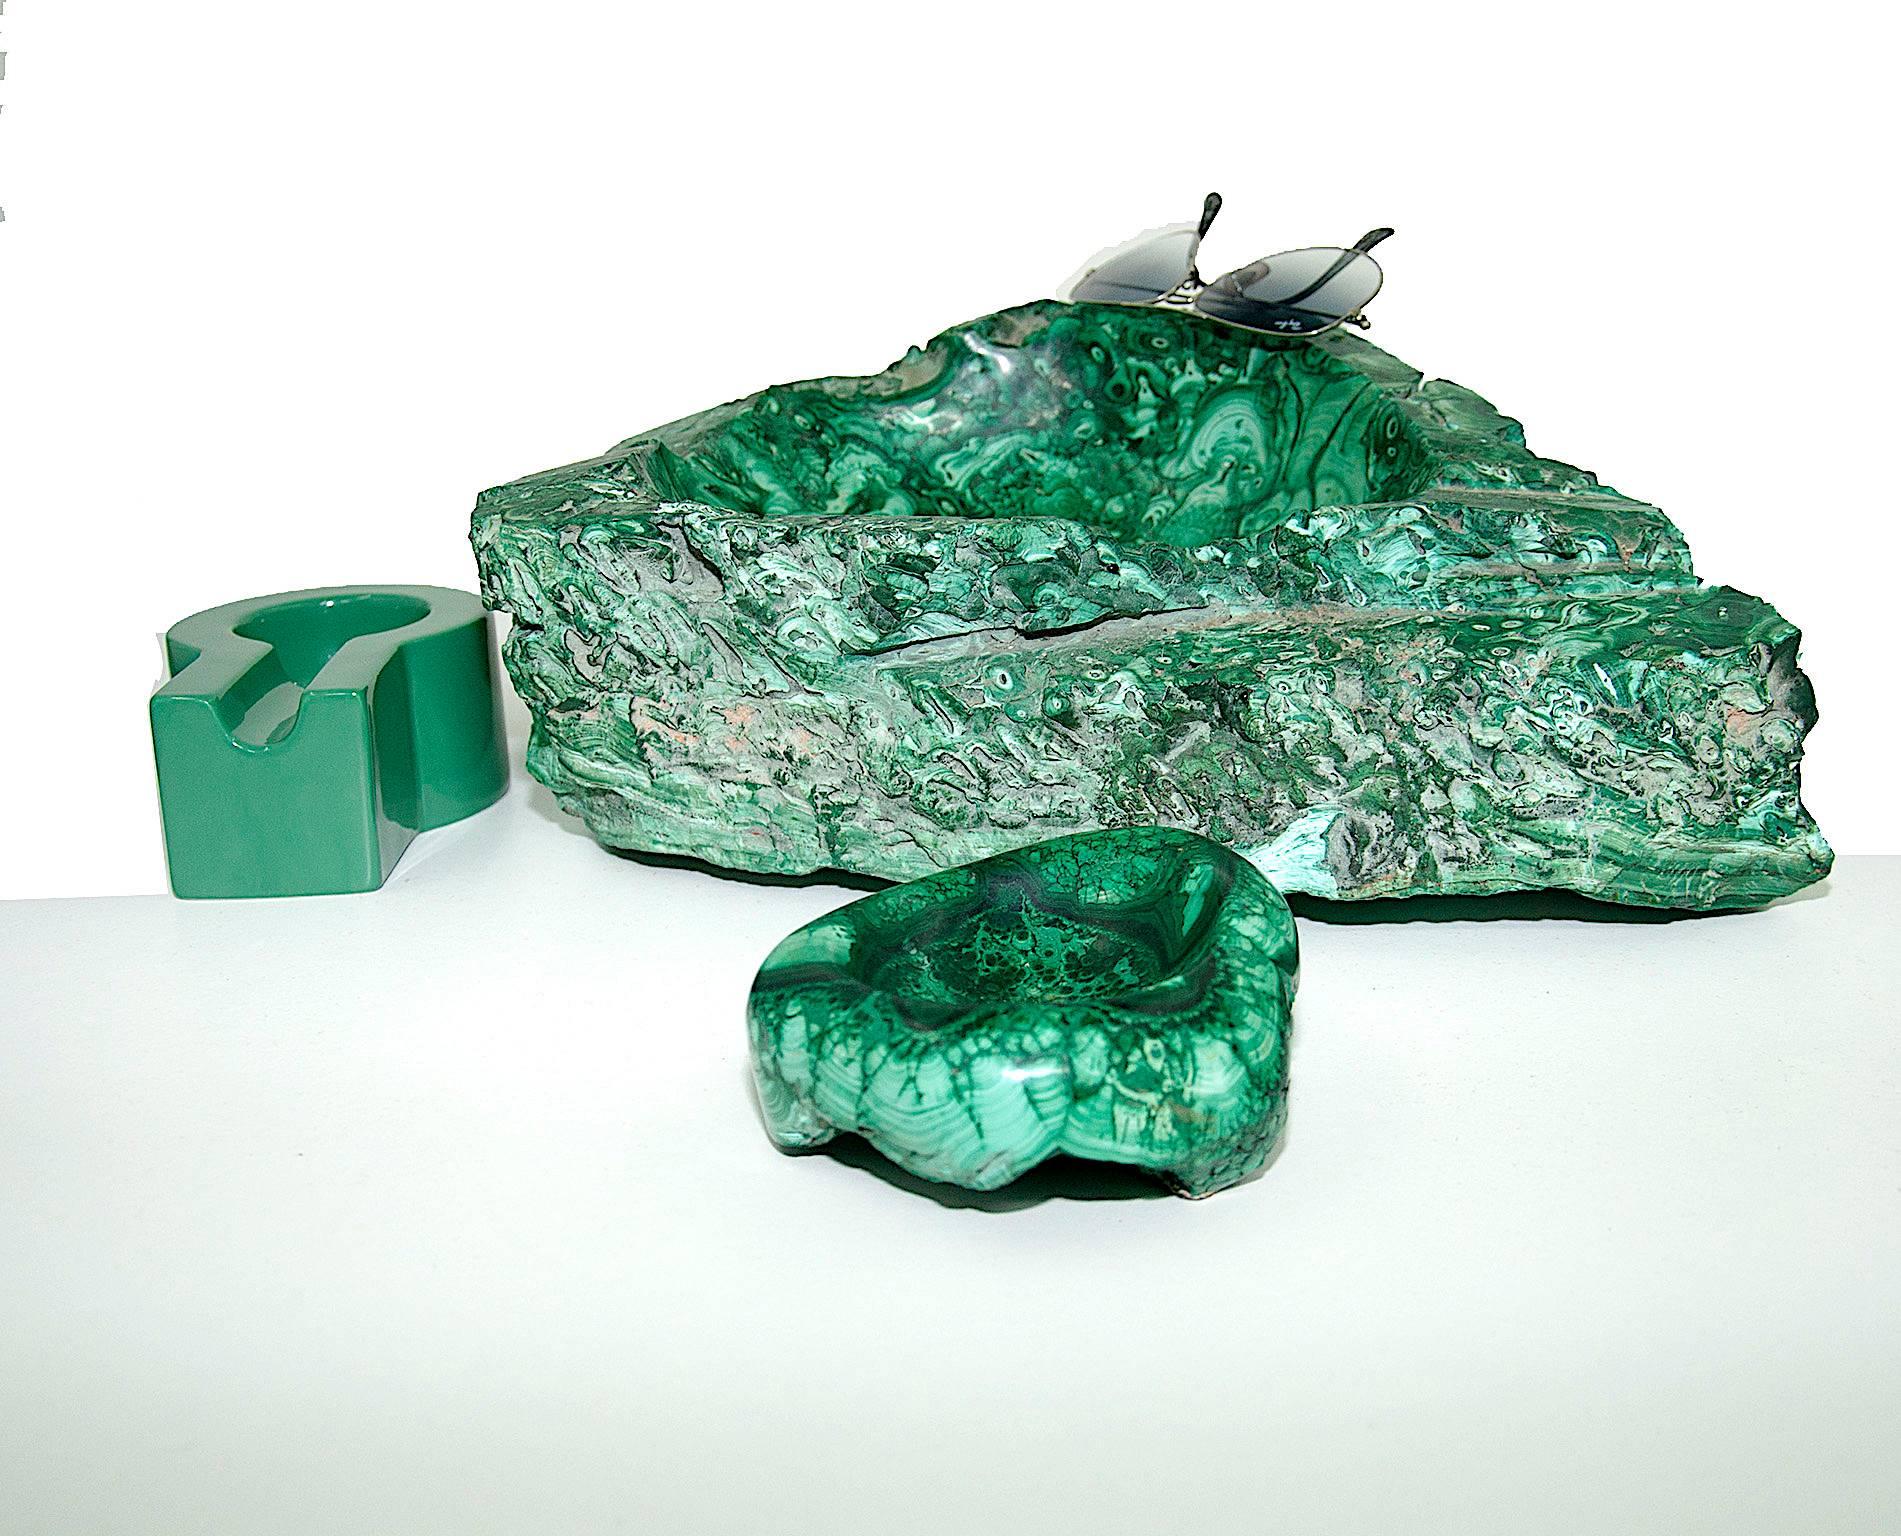 Very very rare weight and dimensions for an object in malachite.
Ashtray in malachite